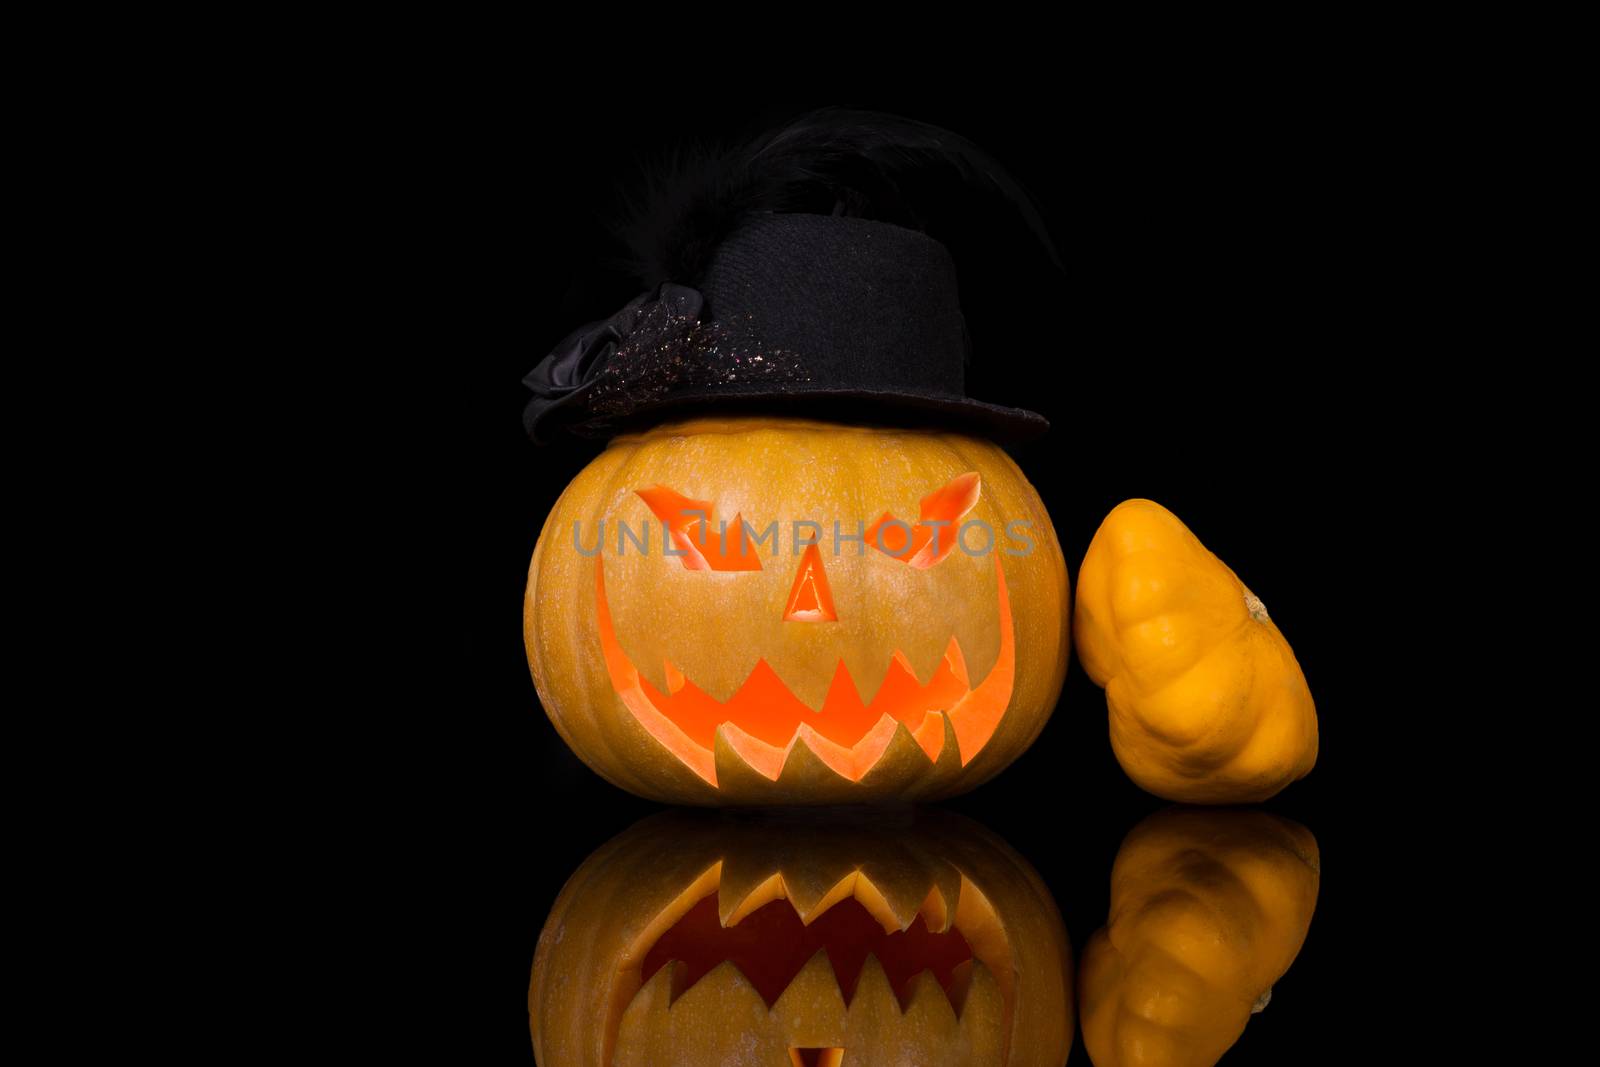 Creepy halloween pumpkin with hat isolated on black background. Traditional american halloween decoration.